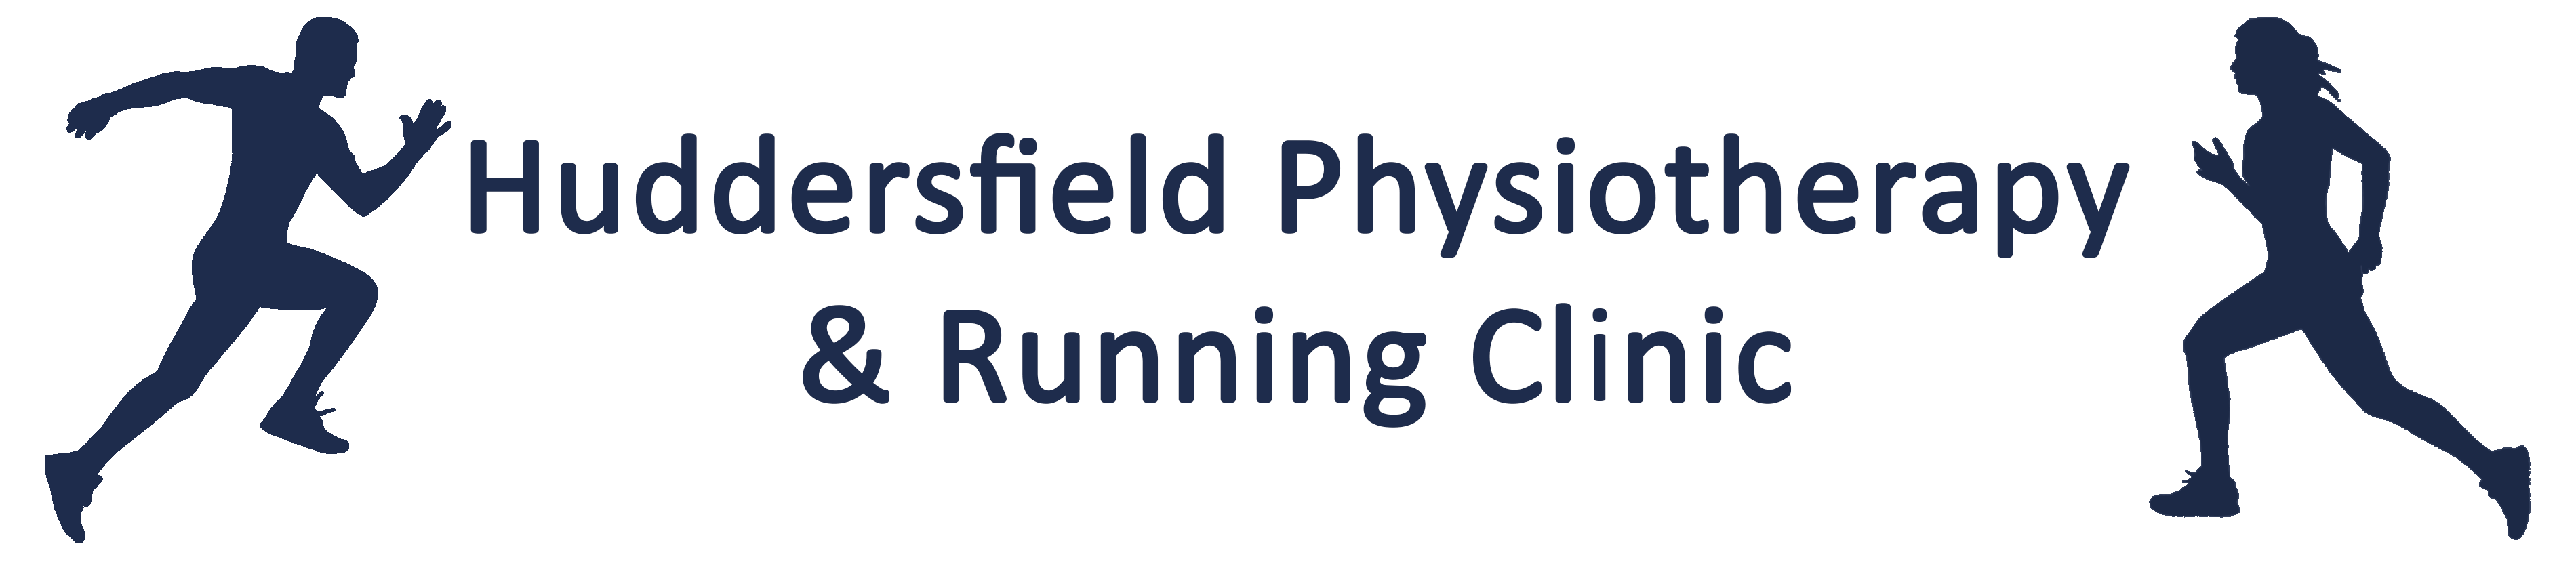 Huddersfield Physiotherapy and Running Clinic